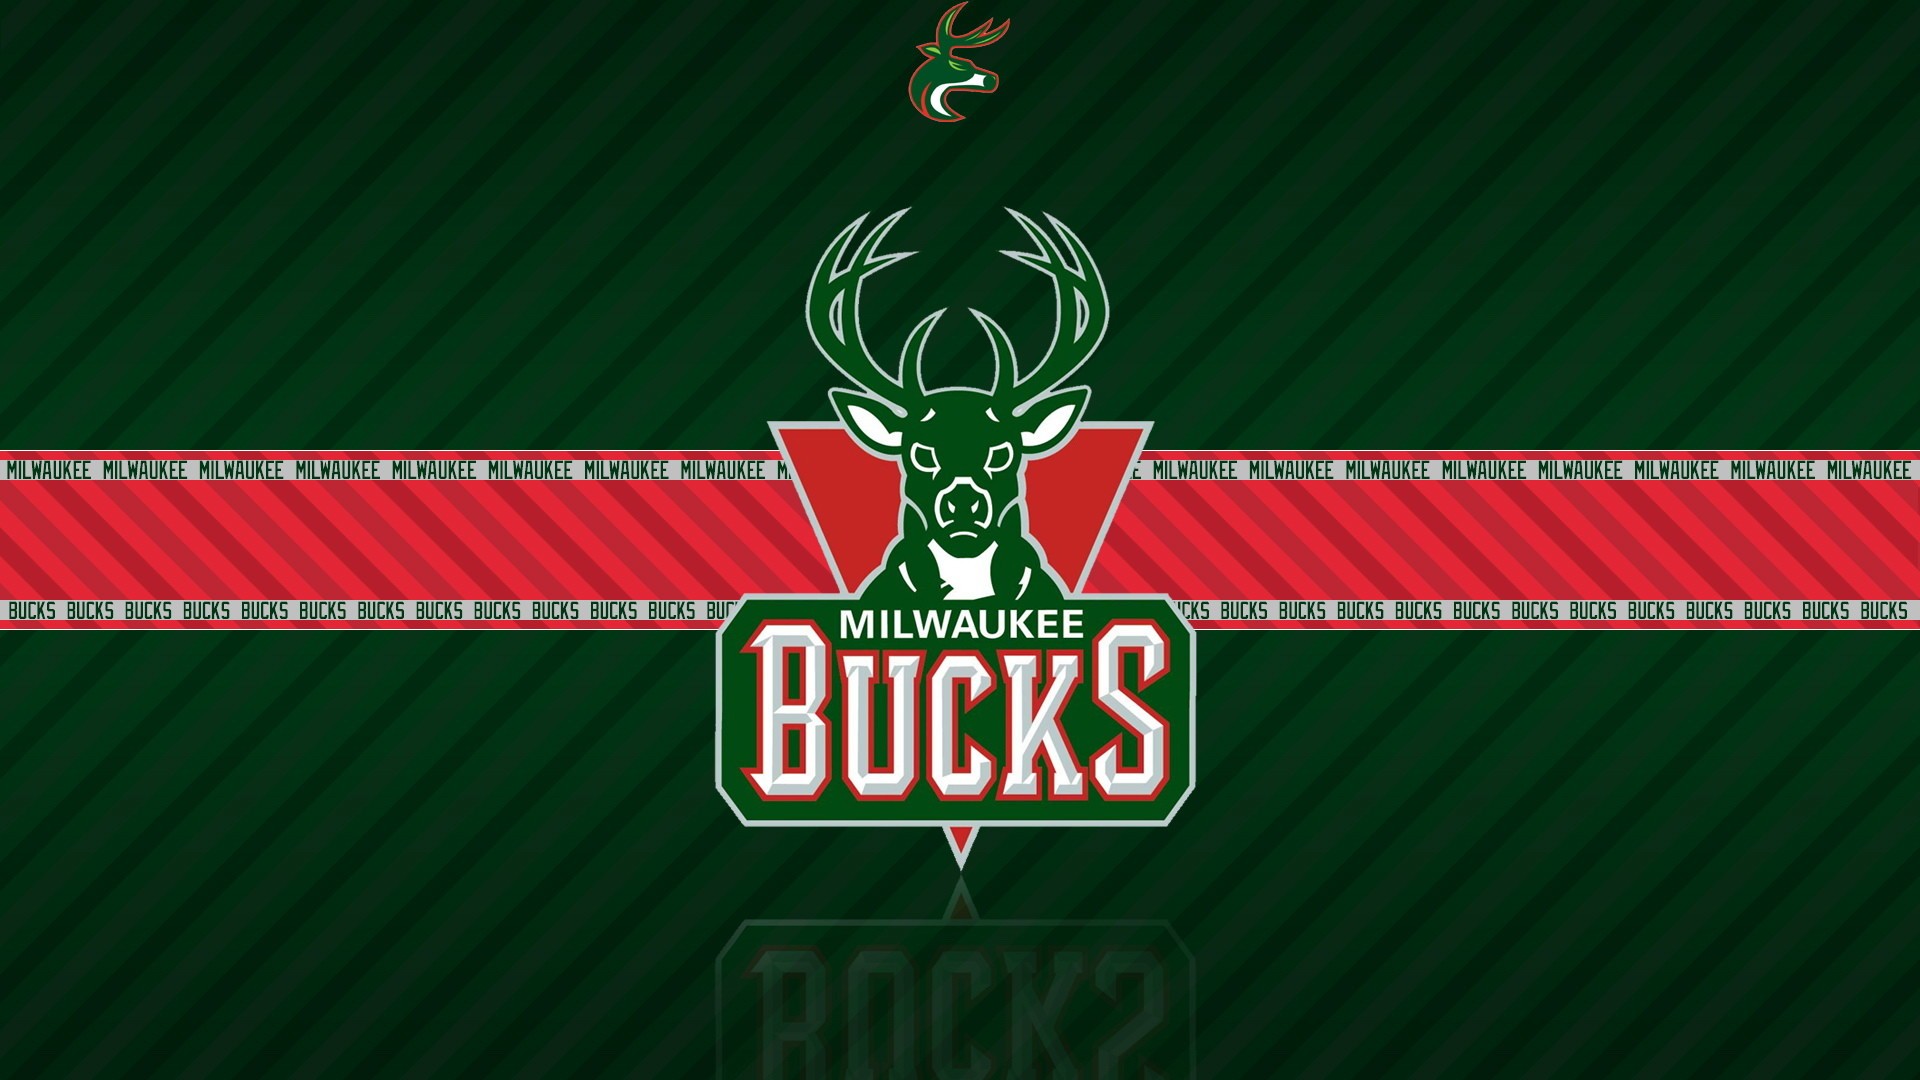 HD Desktop Wallpaper Milwaukee Bucks with high-resolution 1920x1080 pixel. You can use this wallpaper for your Desktop Computer Backgrounds, Windows or Mac Screensavers, iPhone Lock screen, Tablet or Android and another Mobile Phone device